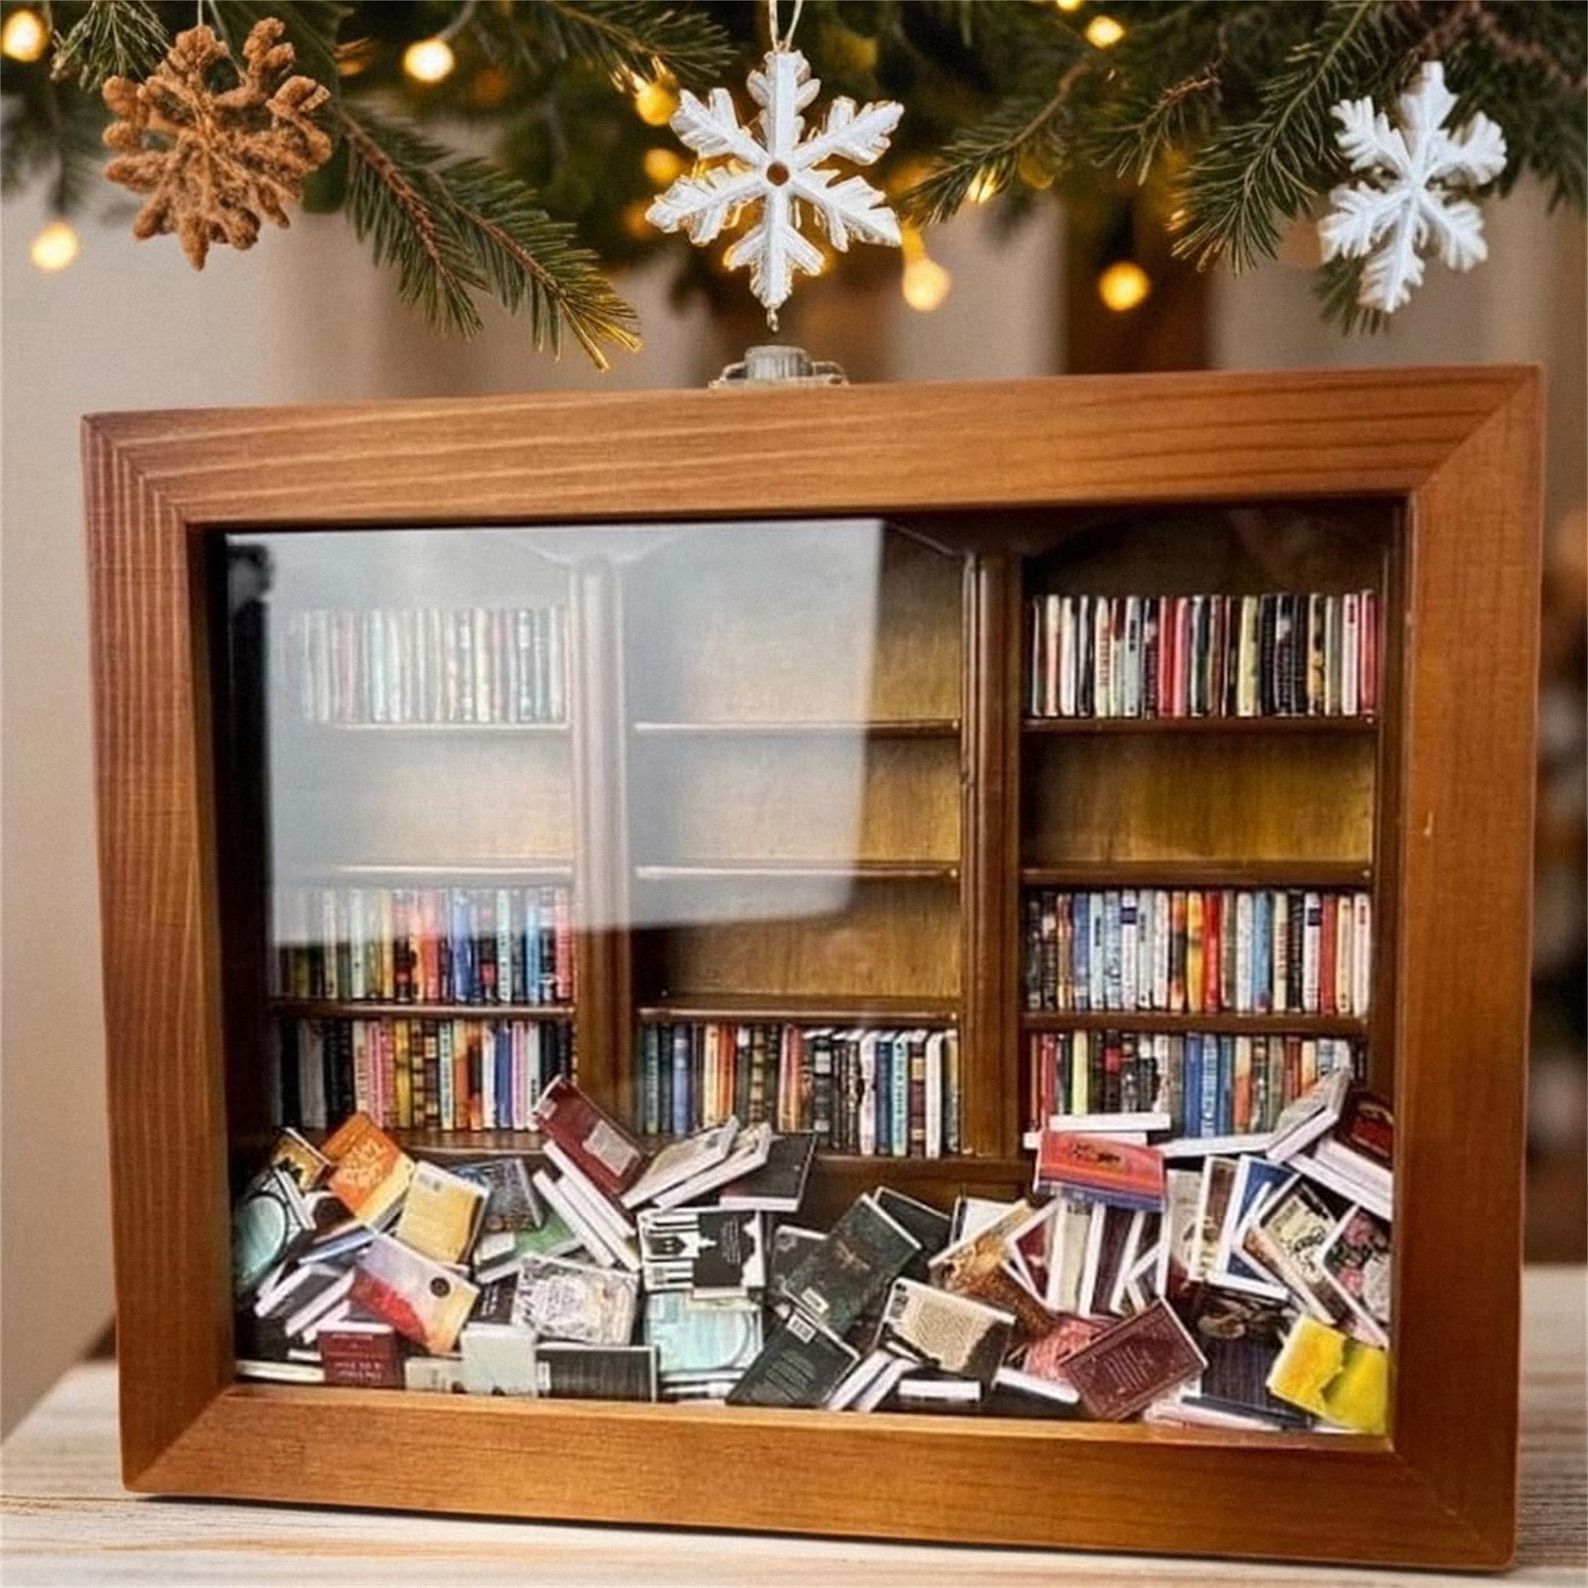 Mini bookshelf with books on shelves and in piles in front of shelf behind glass in front of snowflake background. 